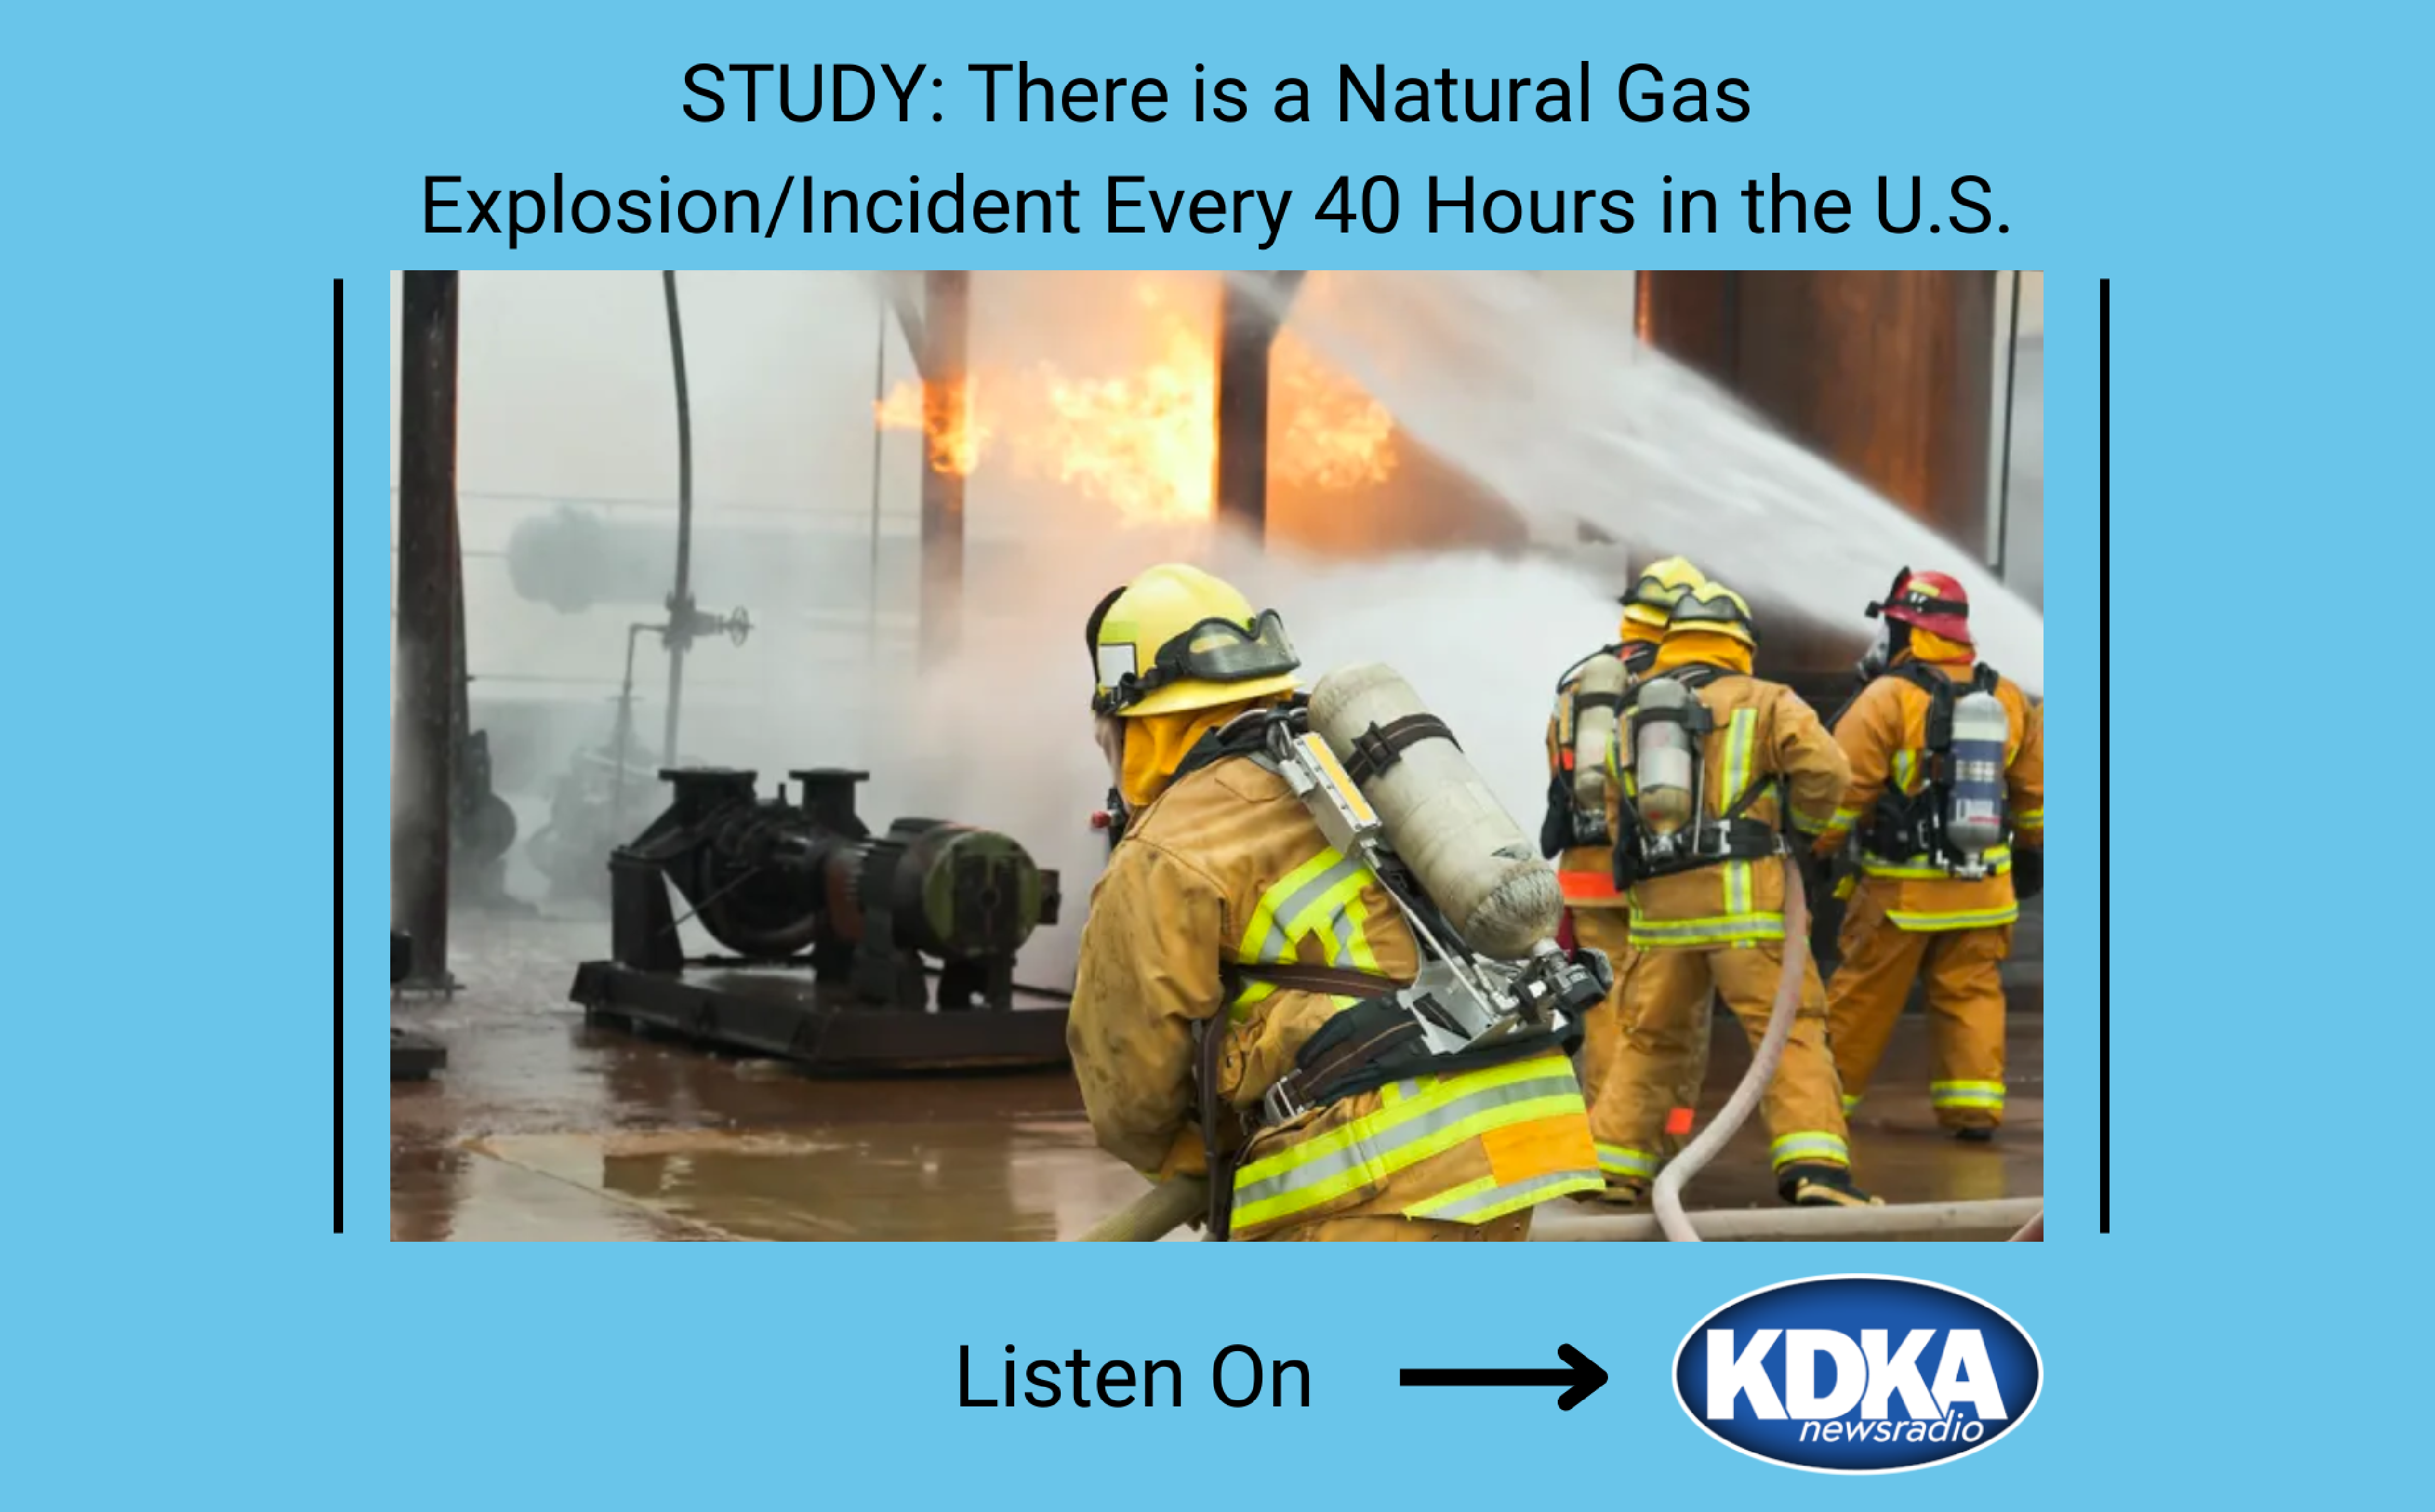 Study: There is a natural gas explosion every 40 hours in the U.S.